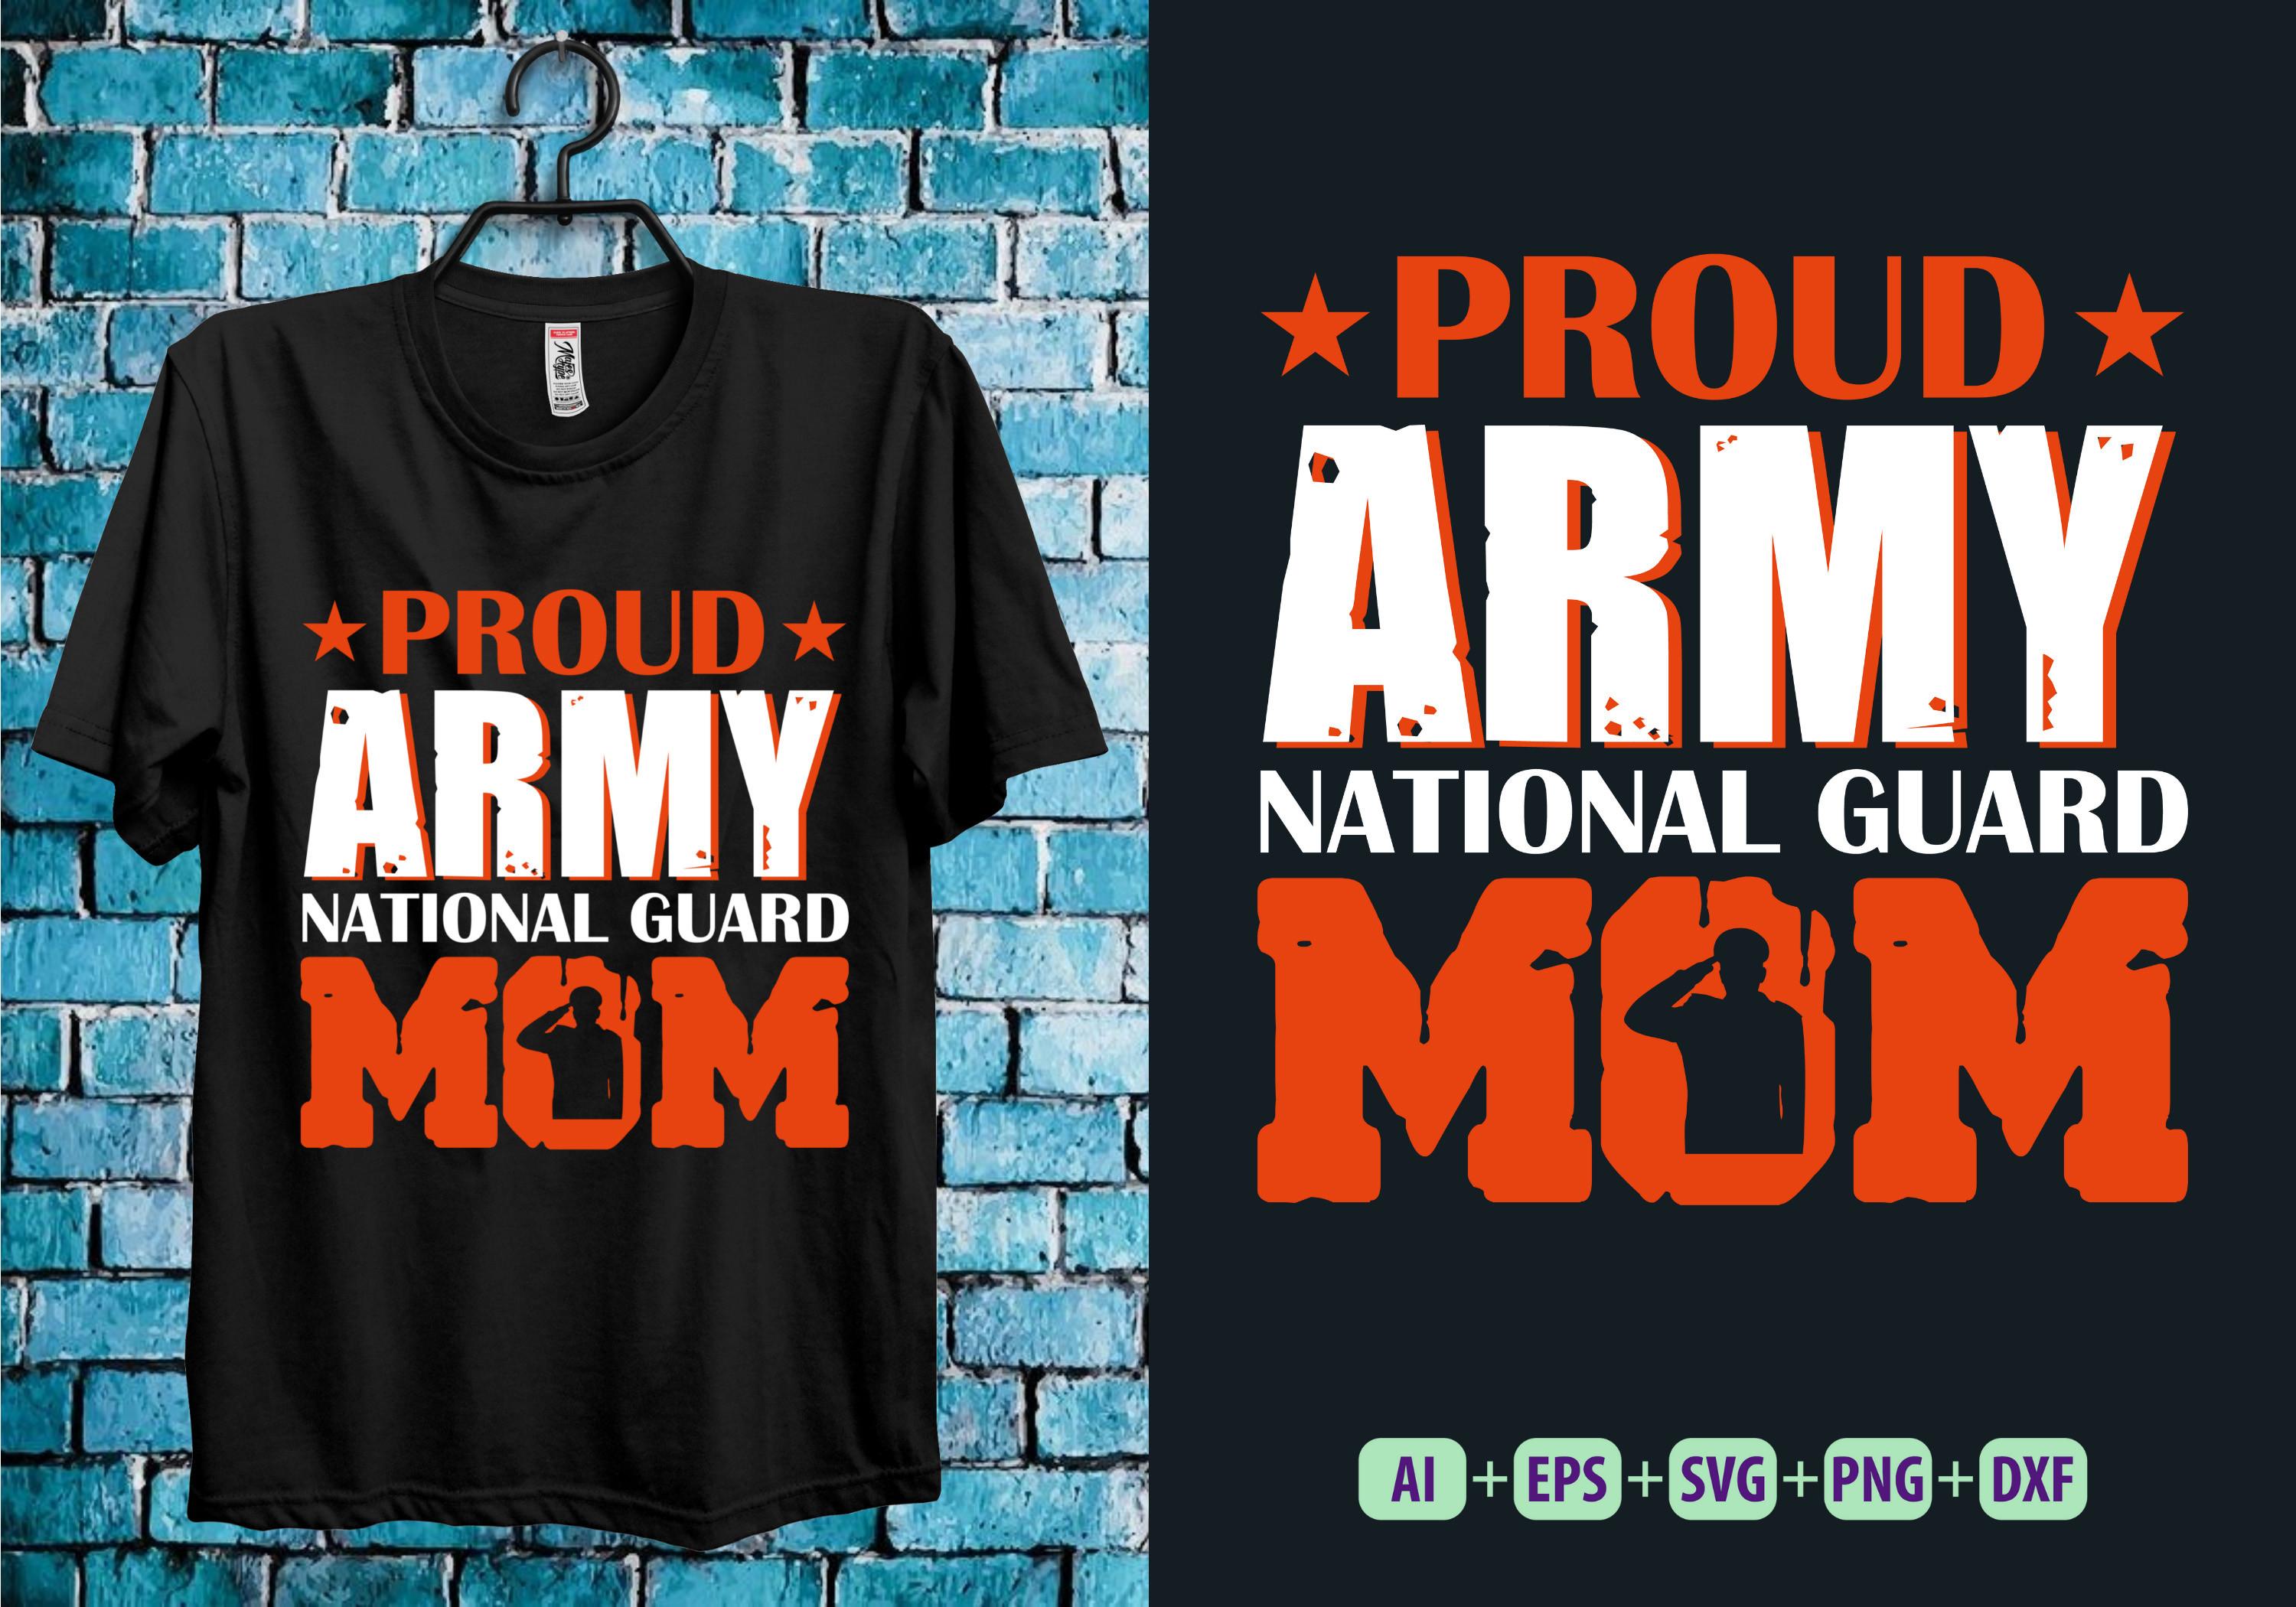 Proud Army National Guard Mom